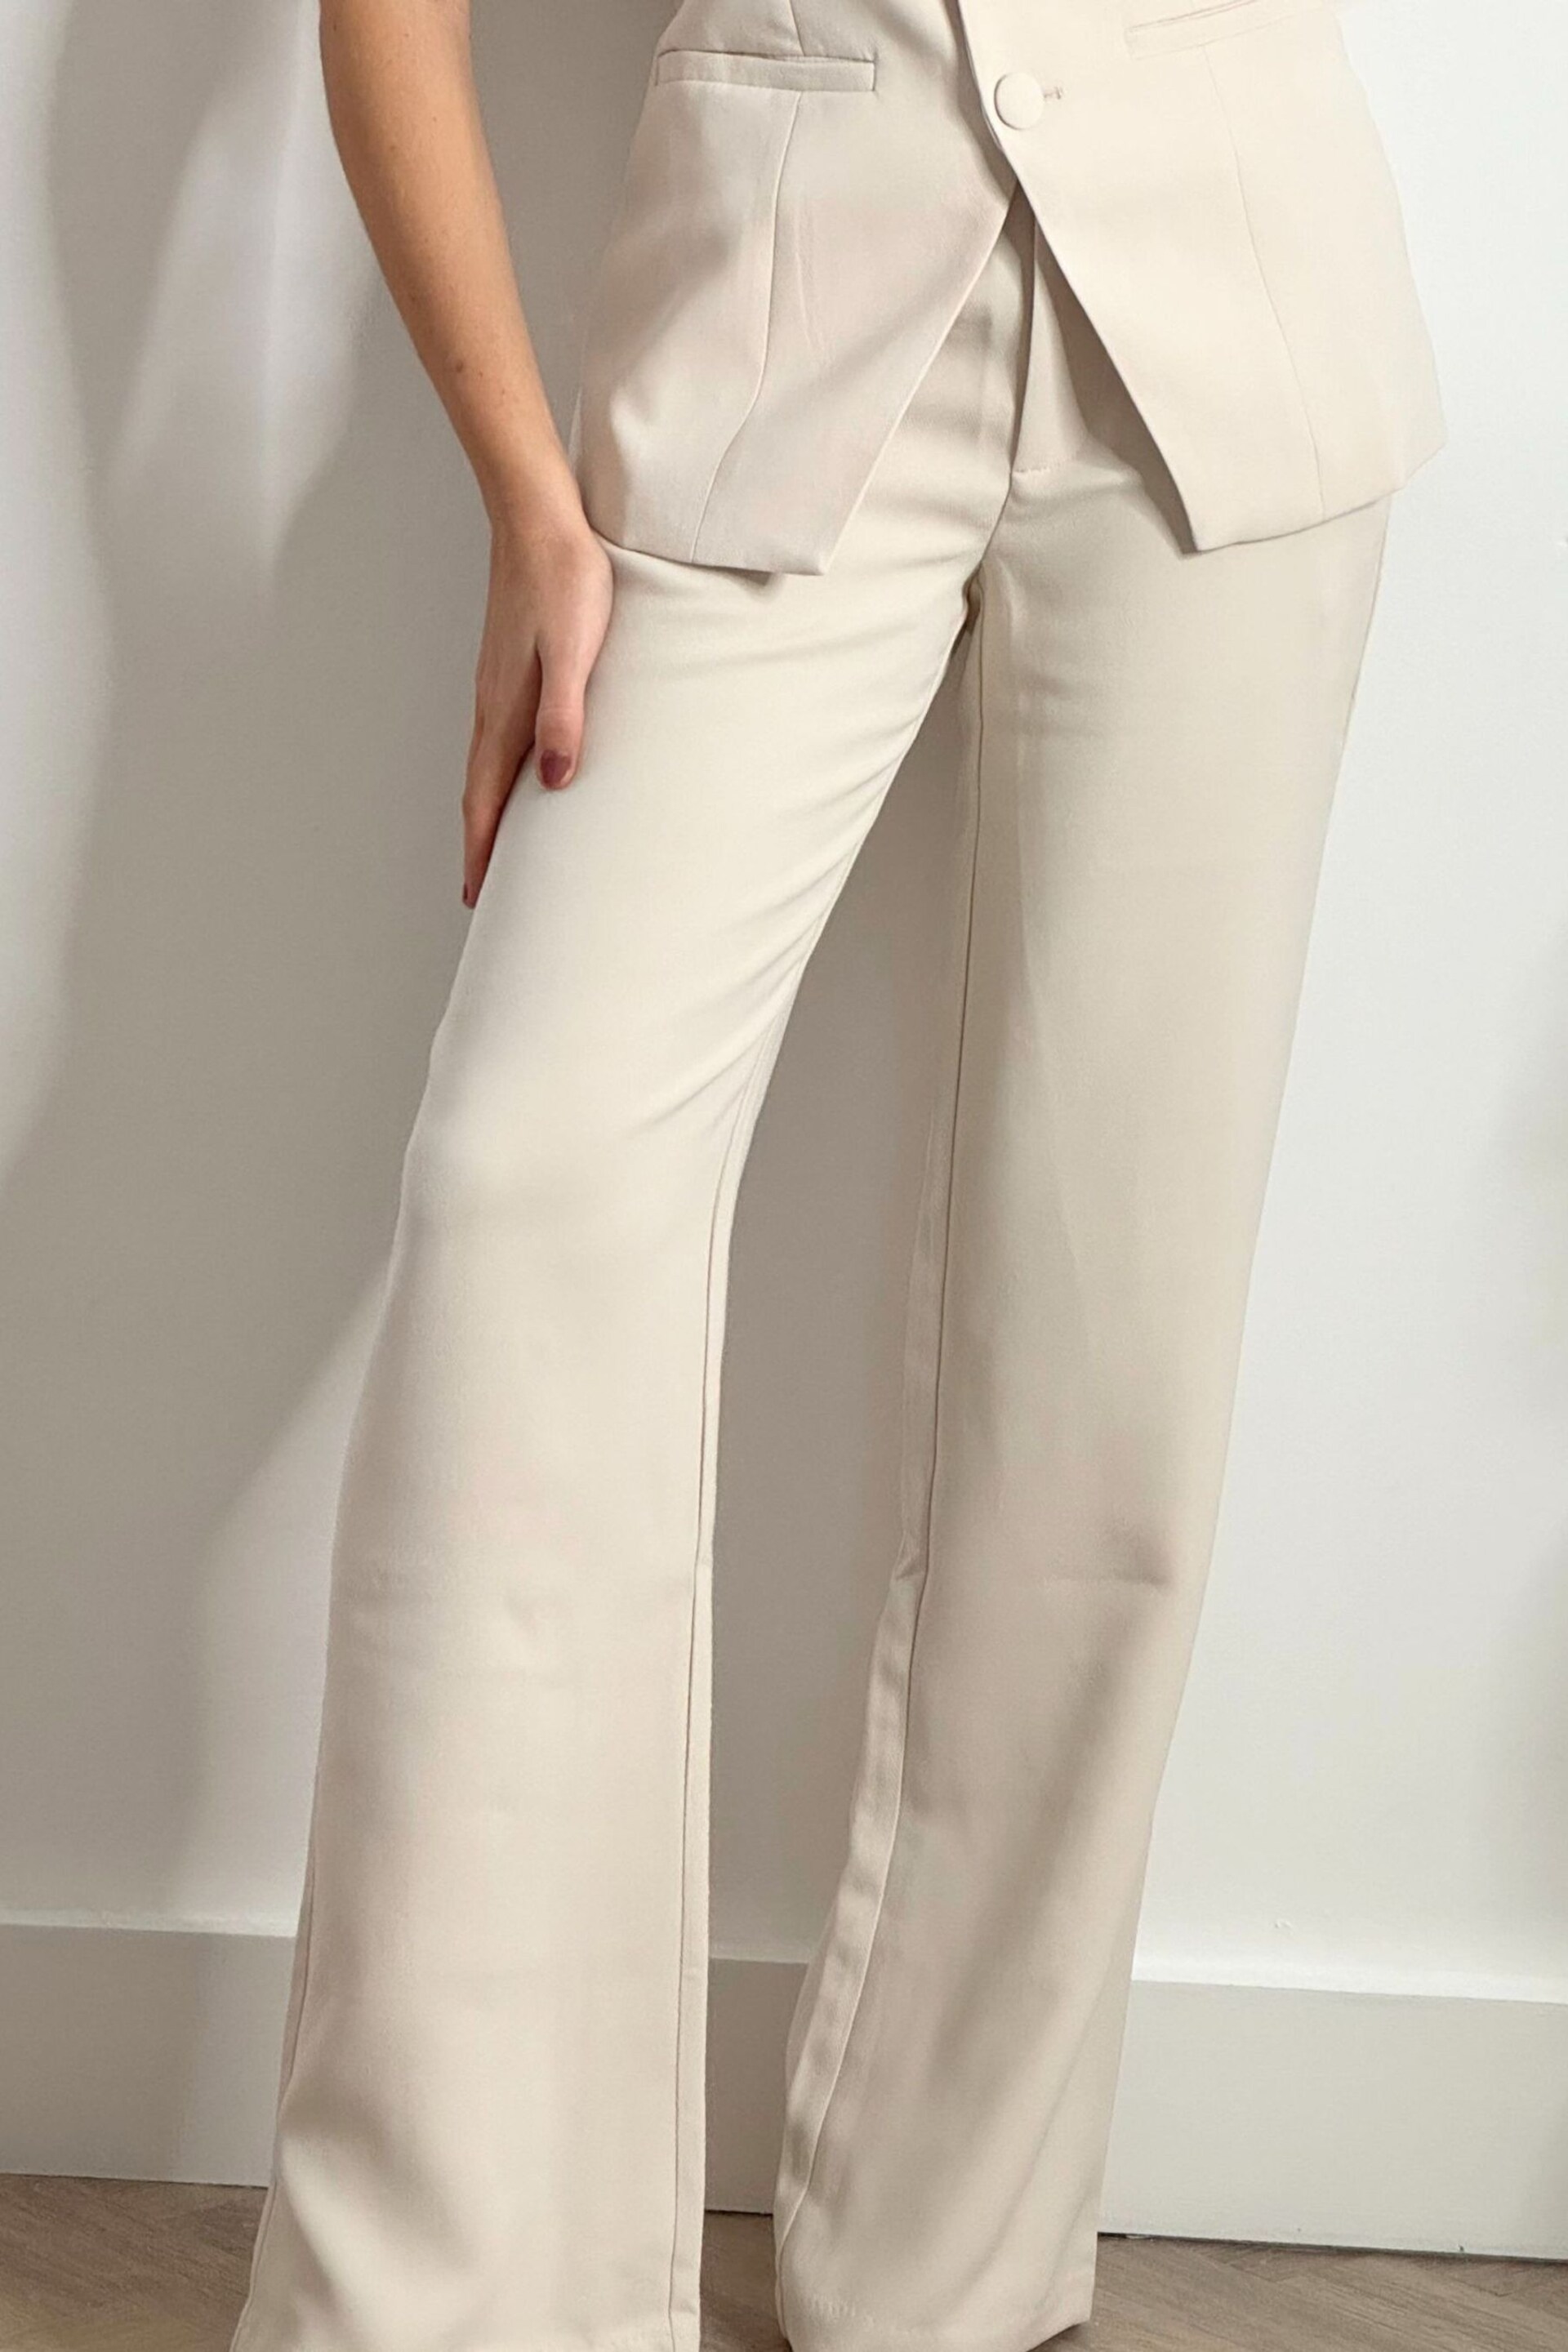 Style Cheat Natural Lyra Straight Leg Trousers - Image 4 of 5